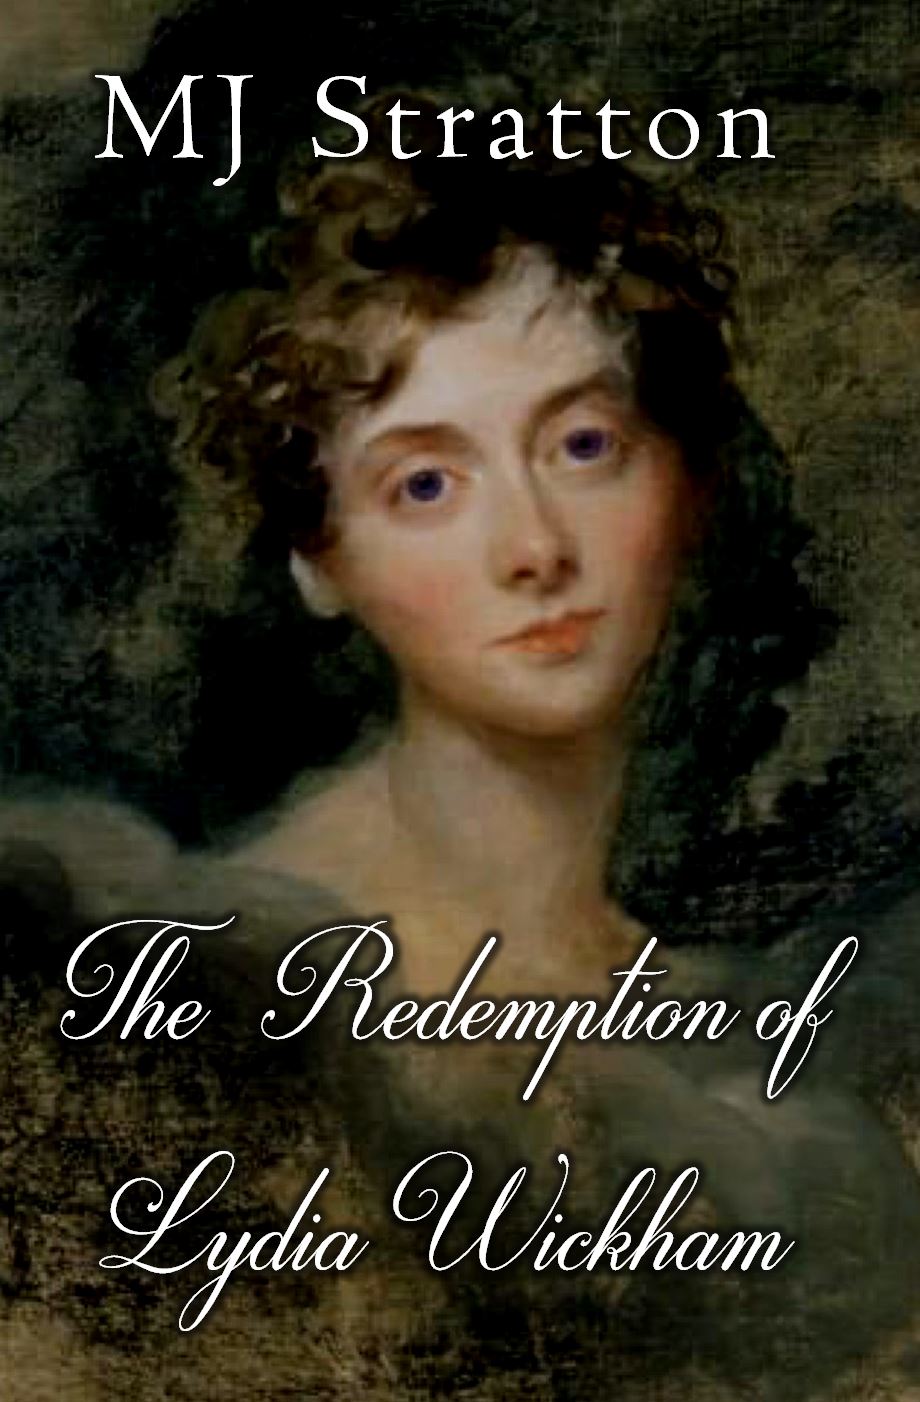 The Redemption of Lydia Wickham book by MJ Stratton book cover